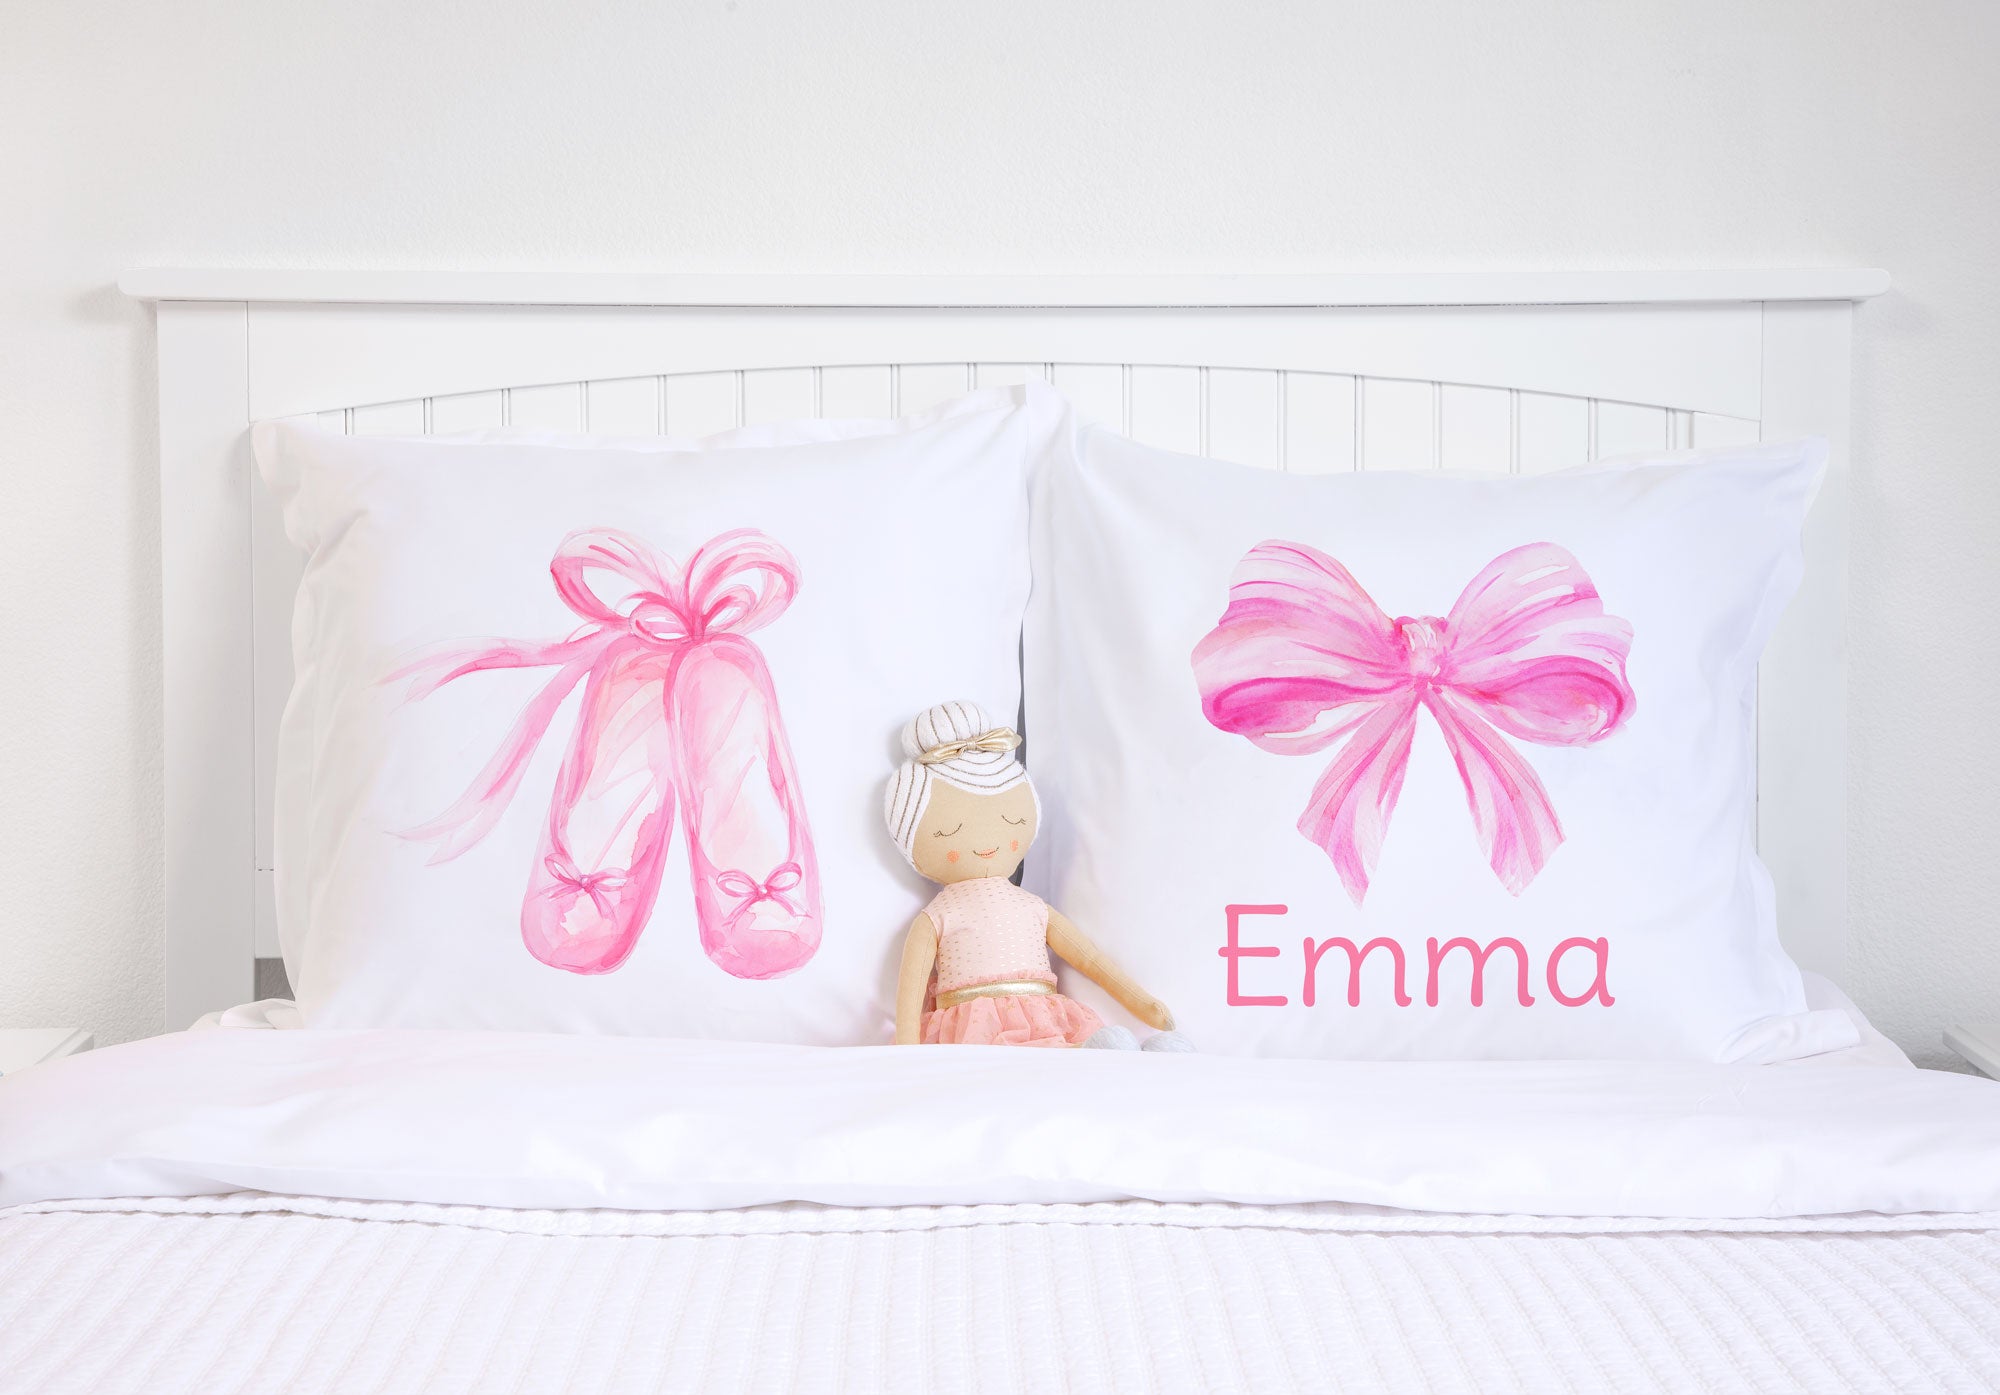 Pink Bow - Personalized Kids Pillowcase Collection